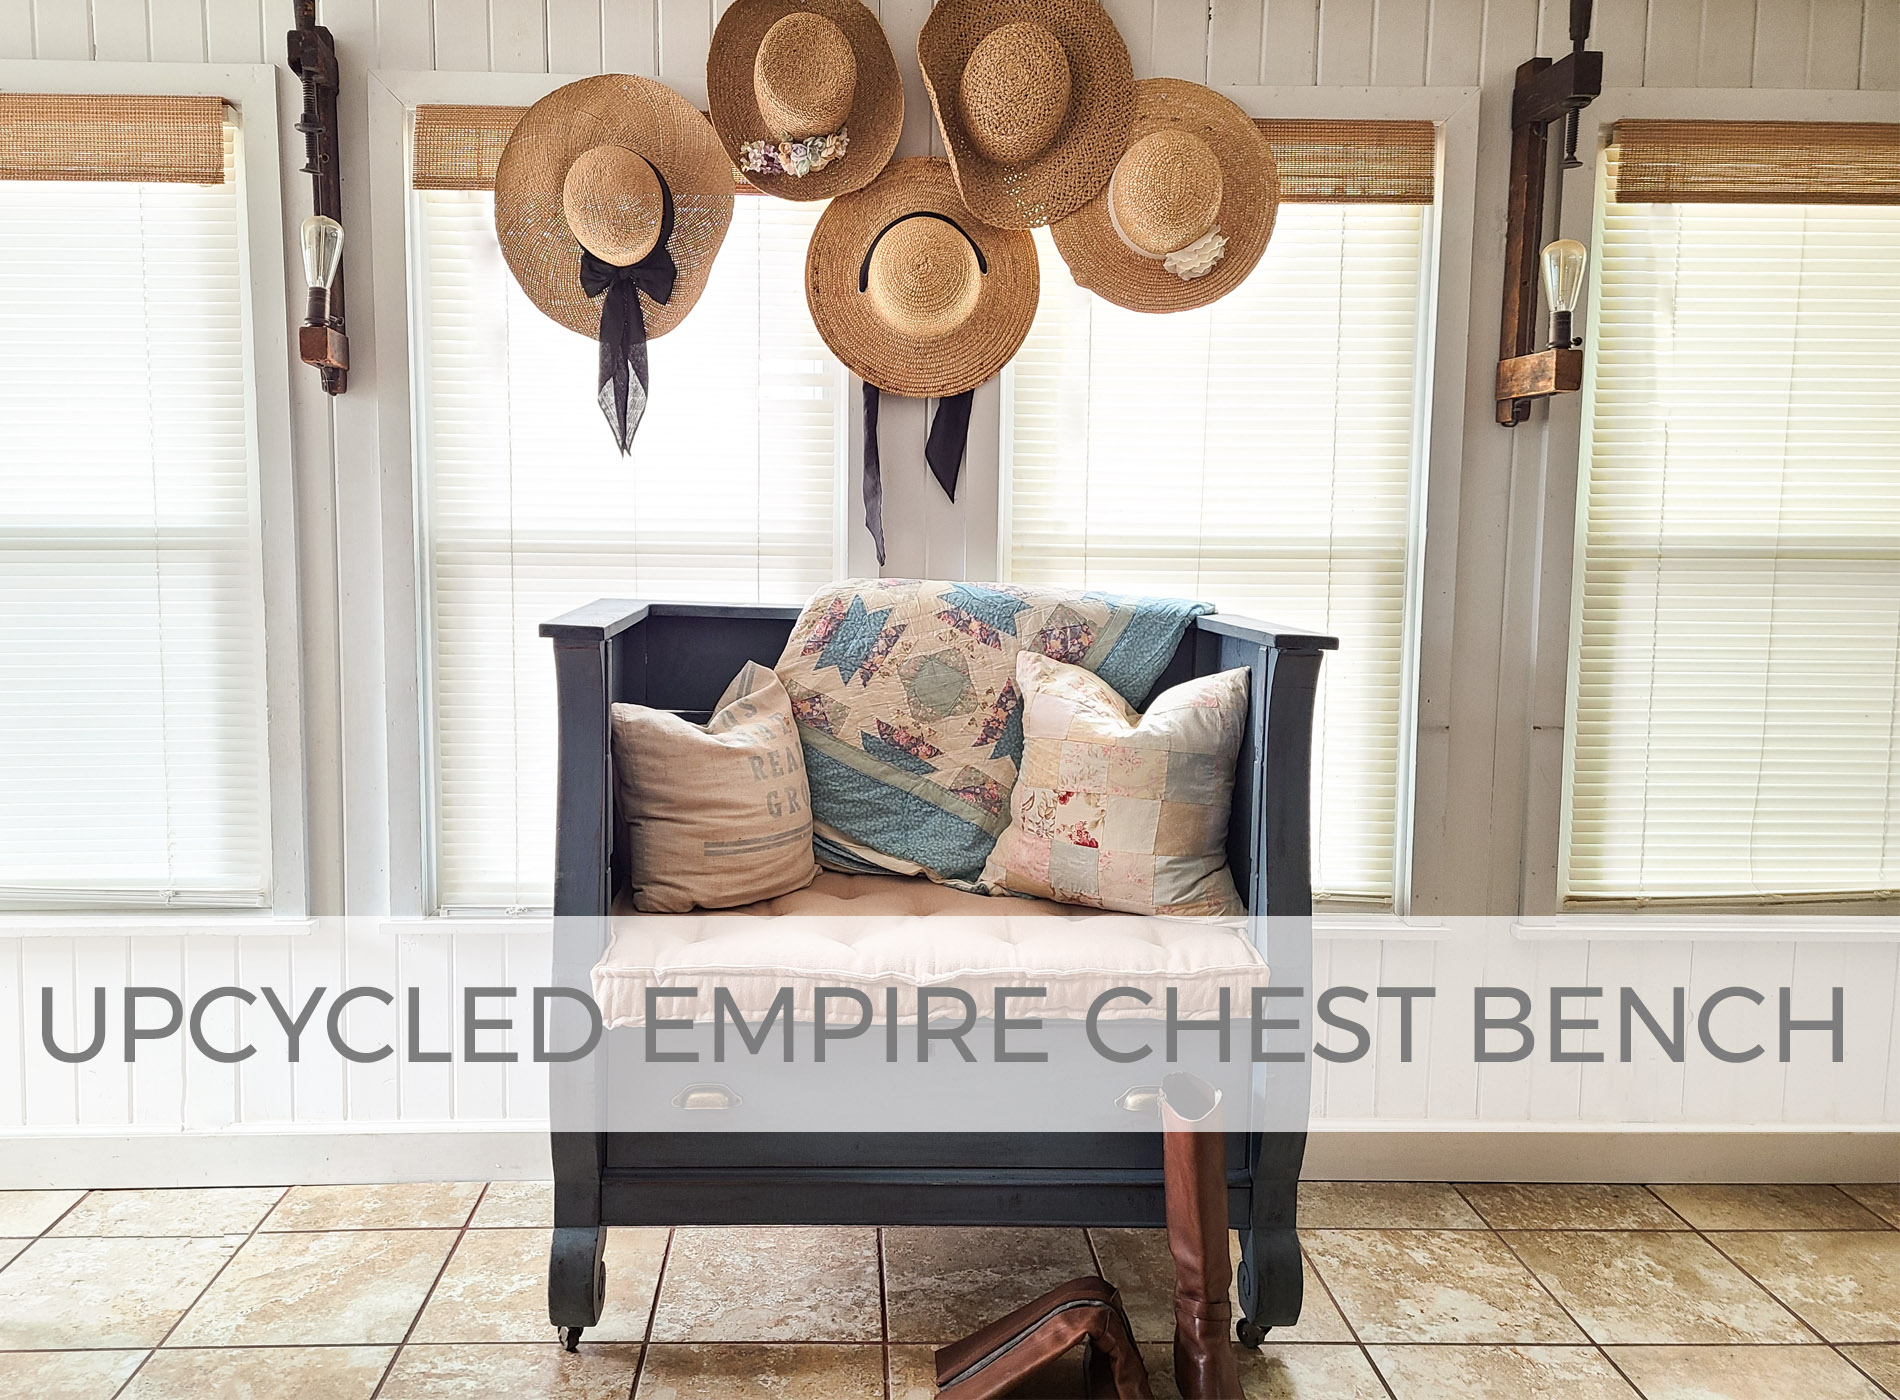 Upcycled Empire Chest Bench by Larissa of Prodigal Pieces | prodigalpieces.com #prodigalpieces